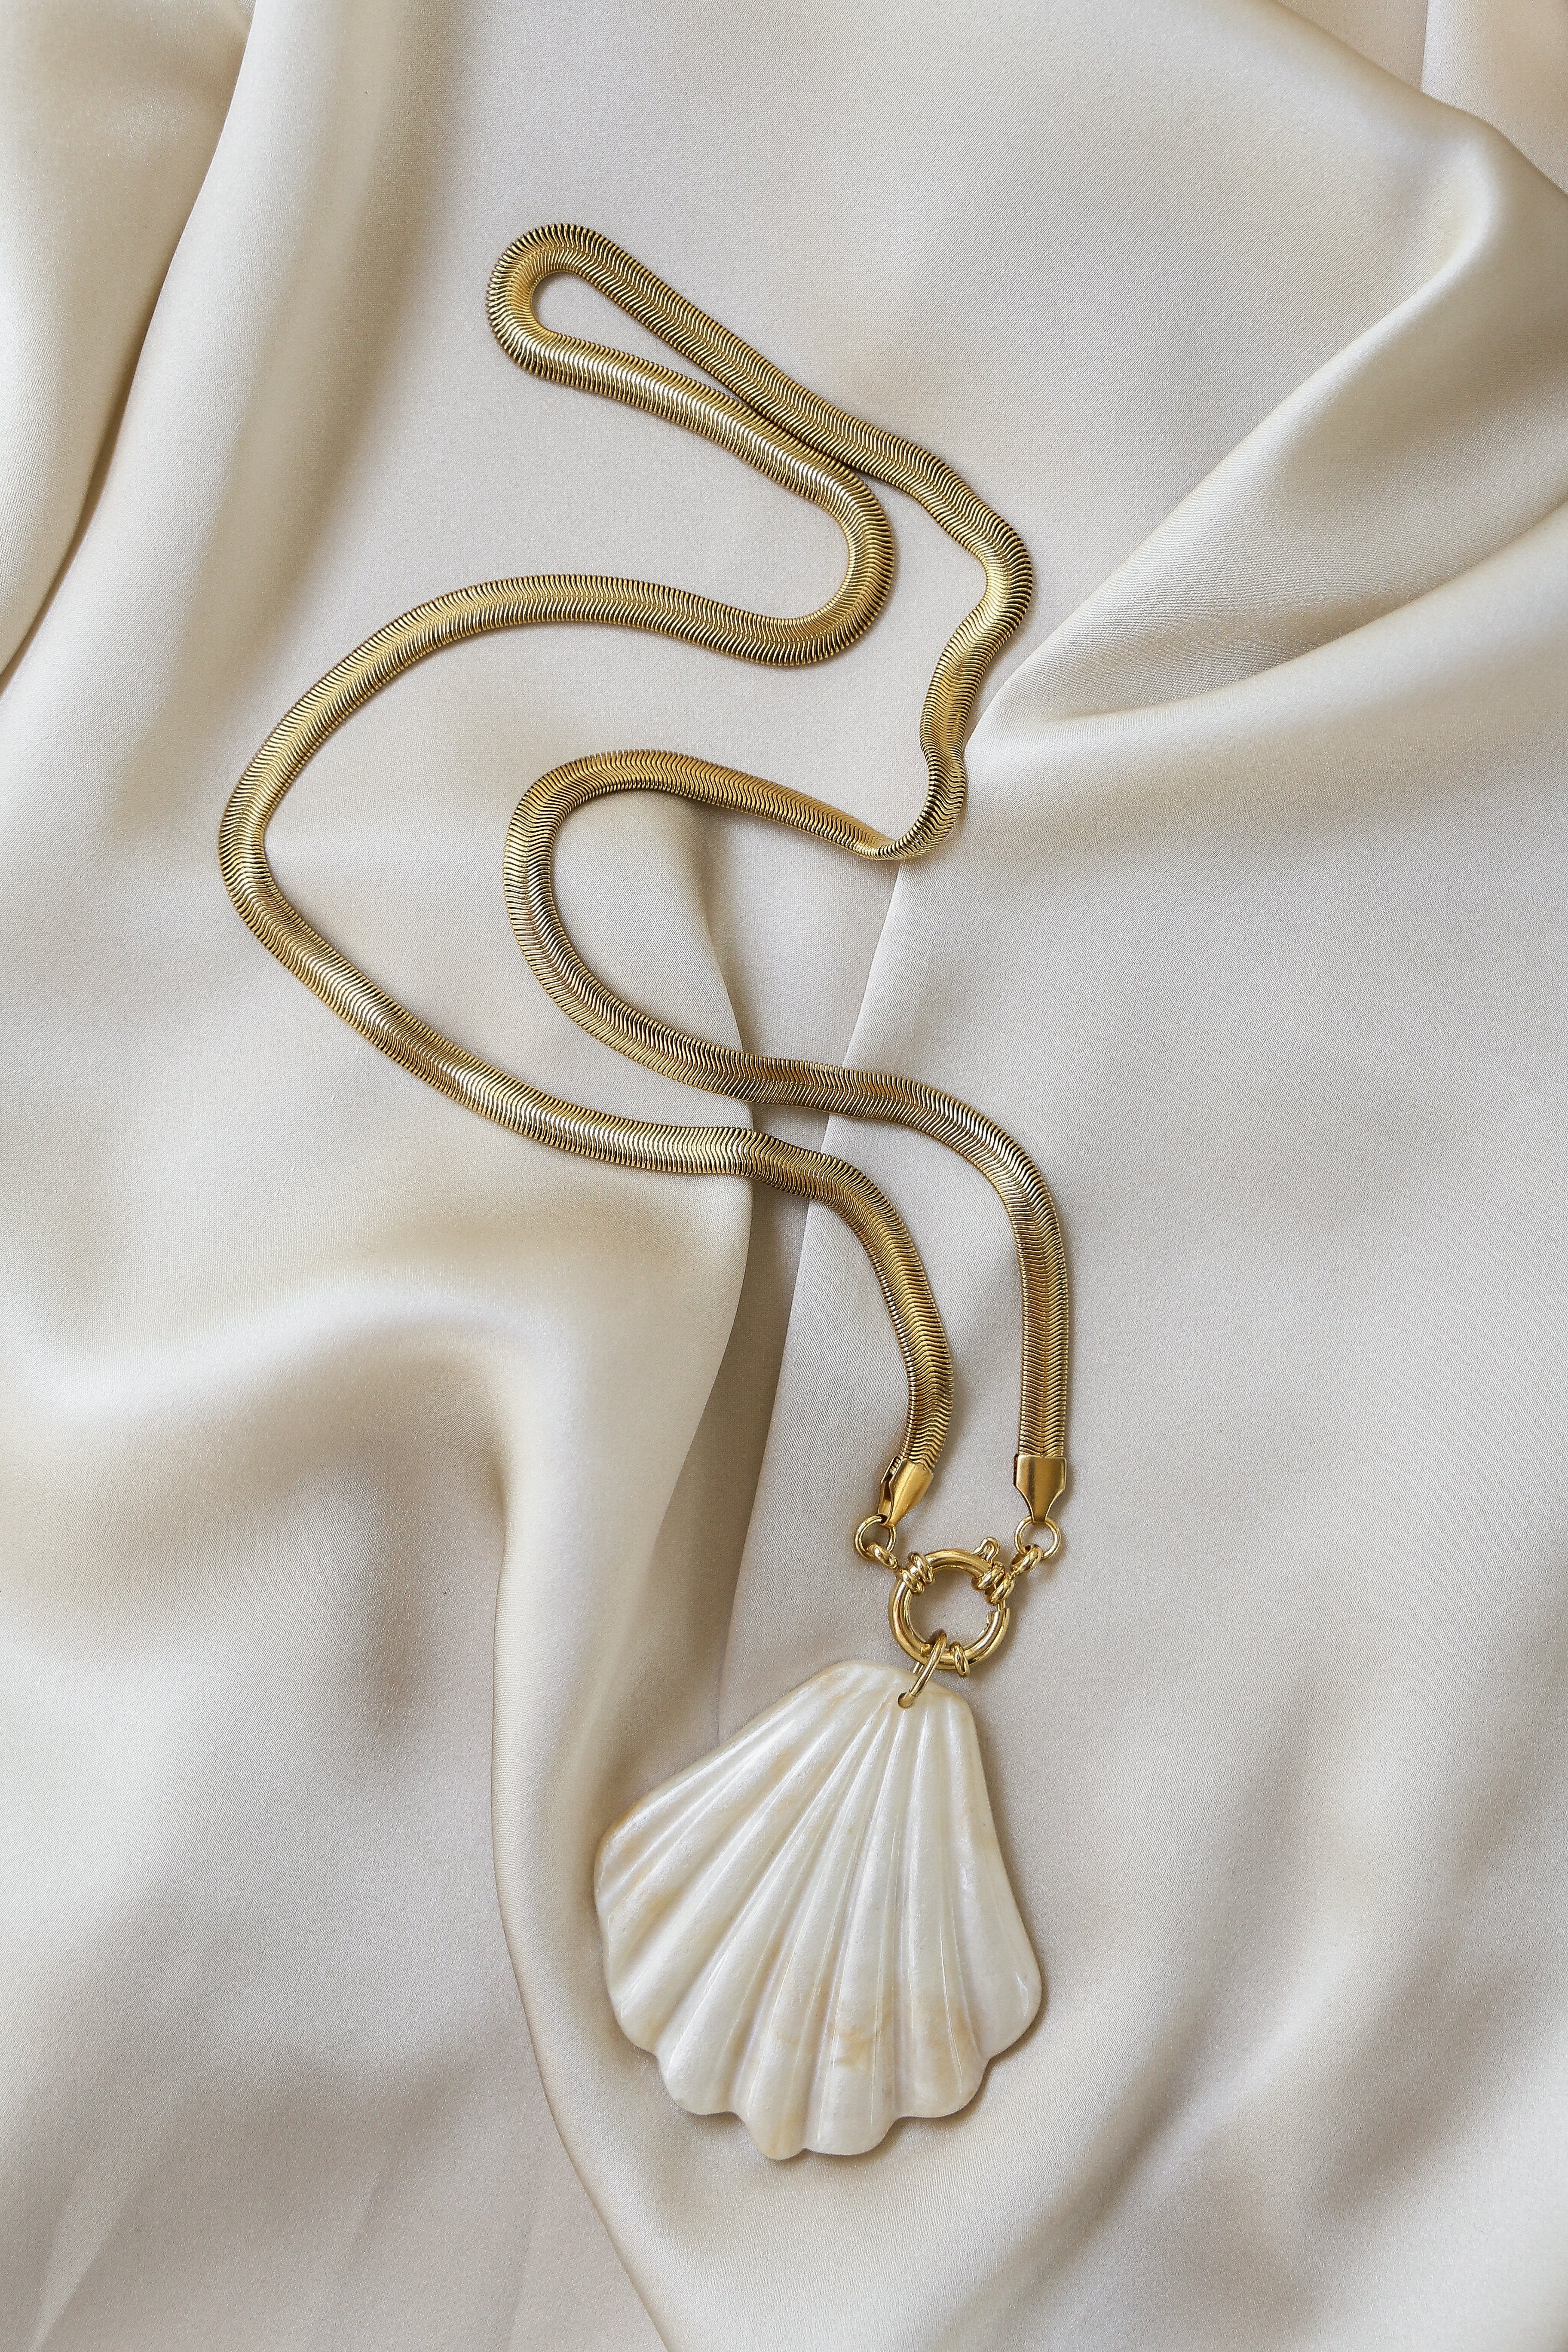 Francine Necklace - Boutique Minimaliste has waterproof, durable, elegant and vintage inspired jewelry